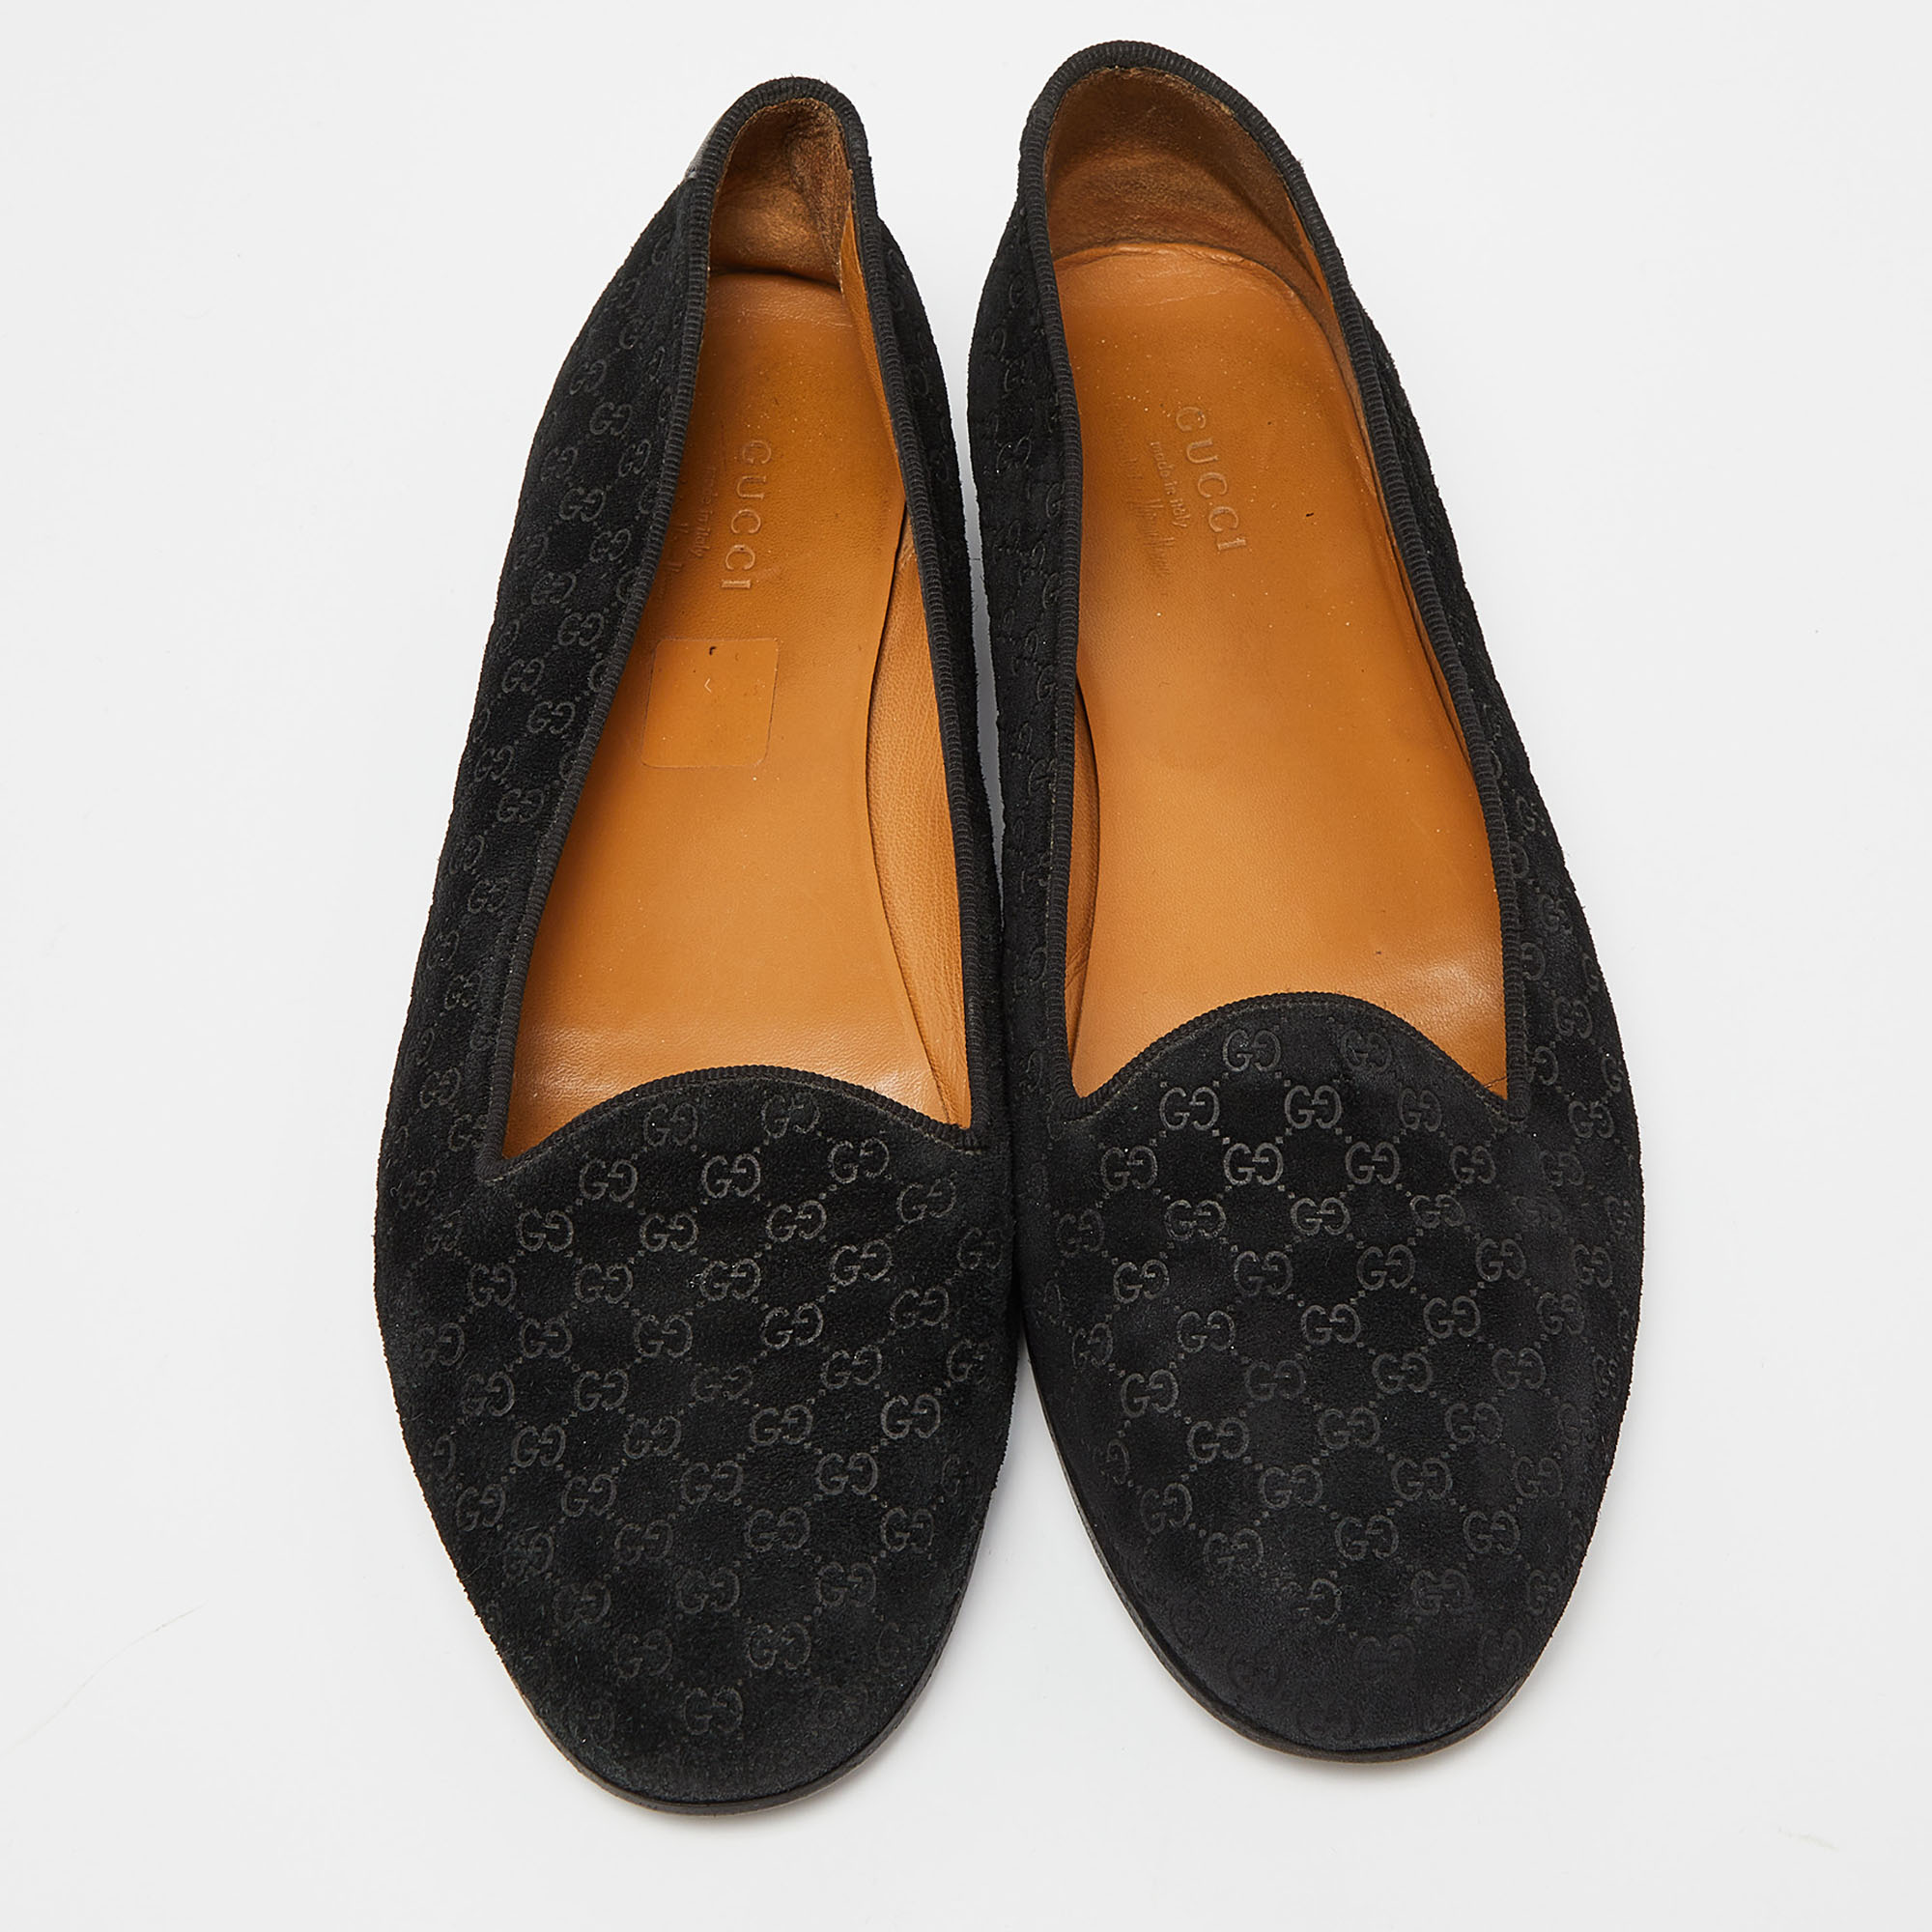 Gucci Black Microguccissima Suede Smoking Slippers Size 40